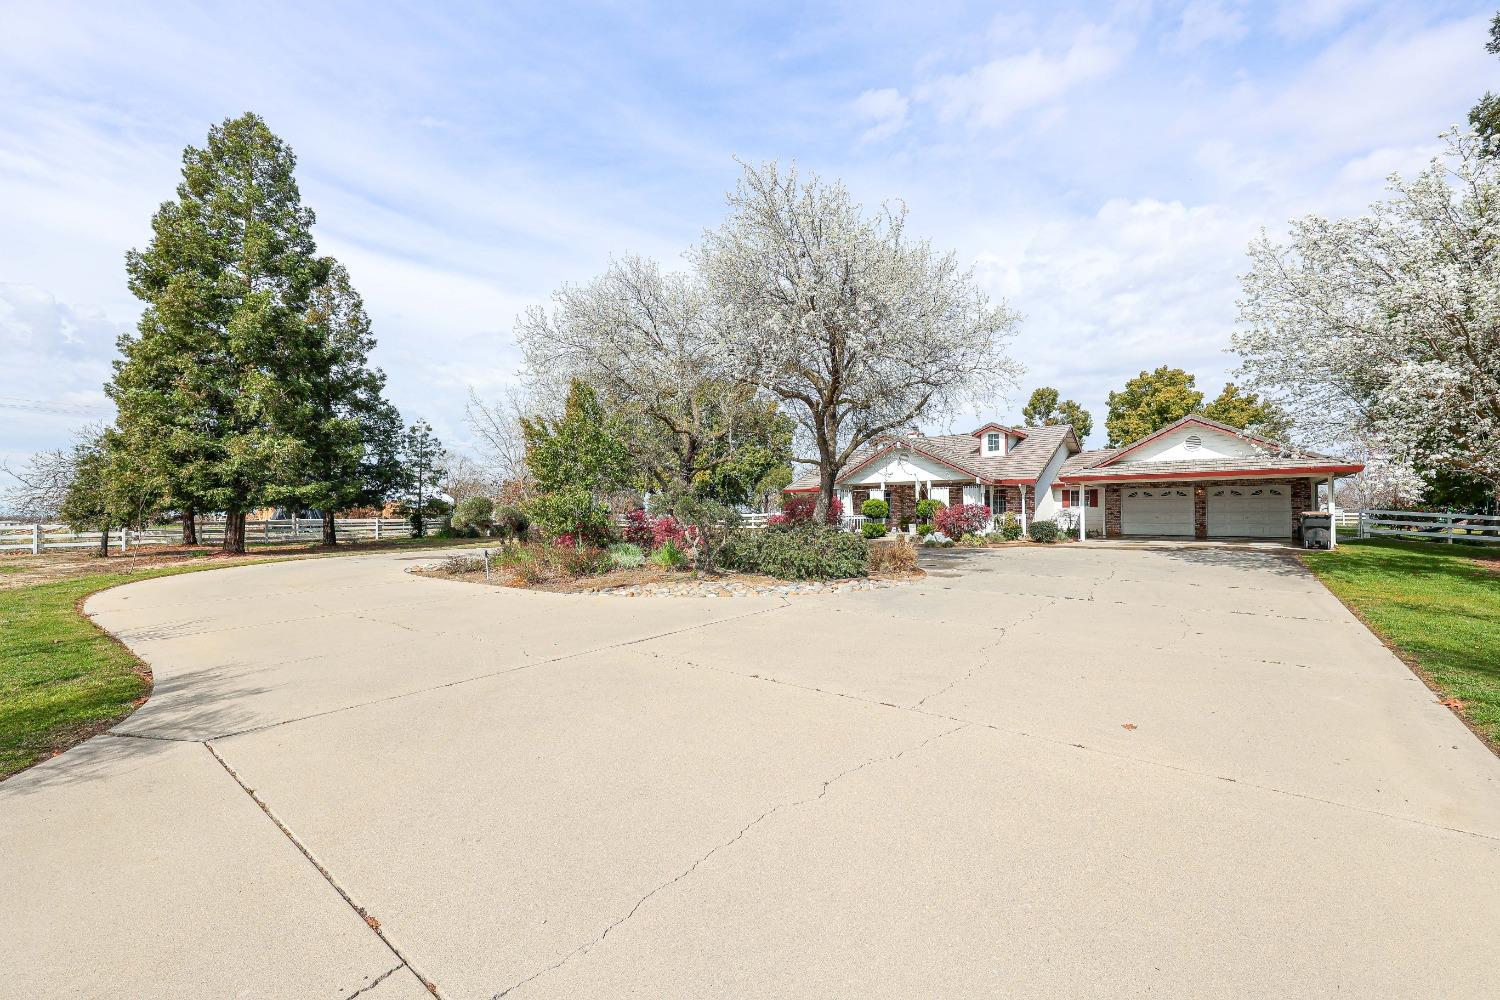 Photo of 9470 Sunset Dr in Atwater, CA